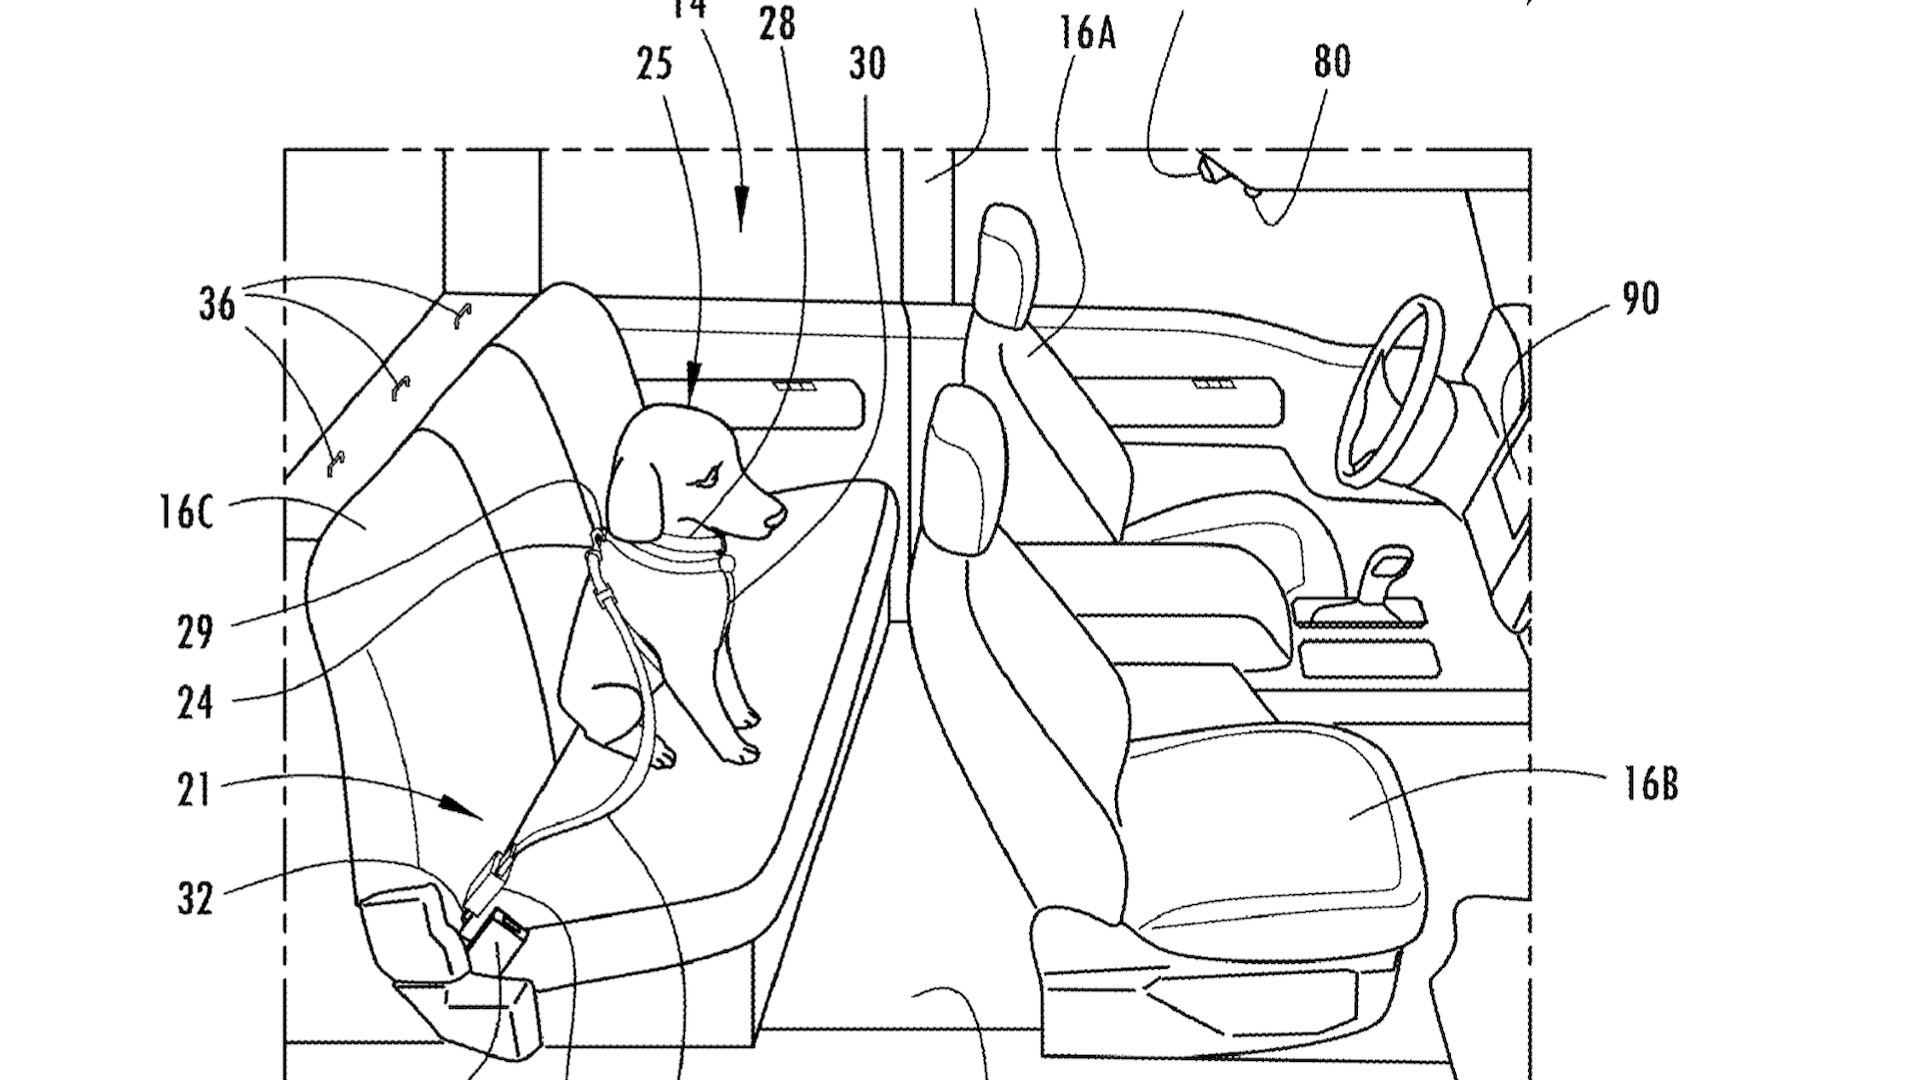 Ford Patents Living Room On Wheels